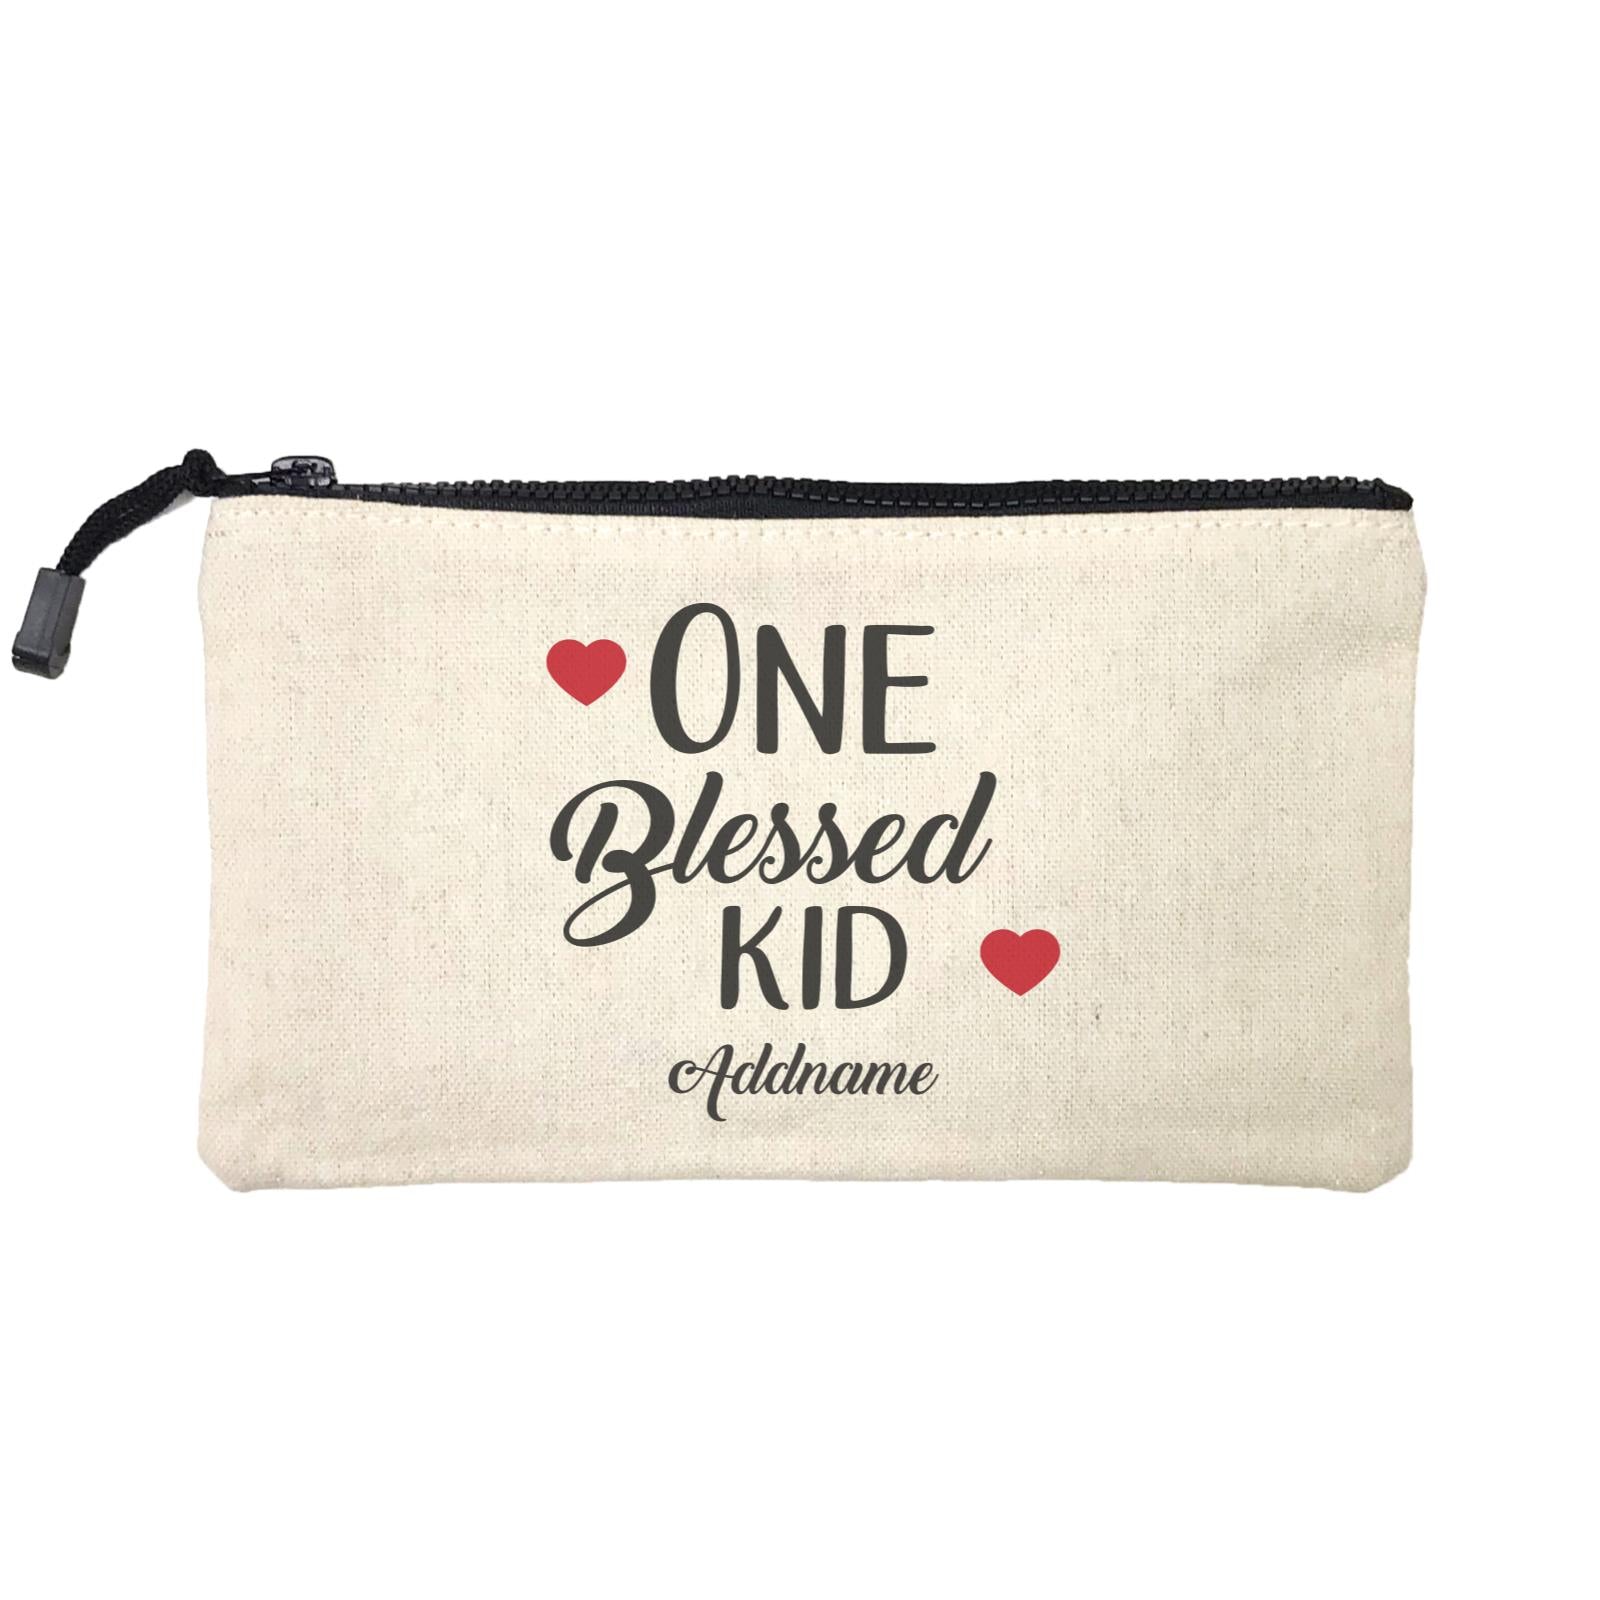 Christian Series One Blessed Kid Addname Mini Accessories Stationery Pouch